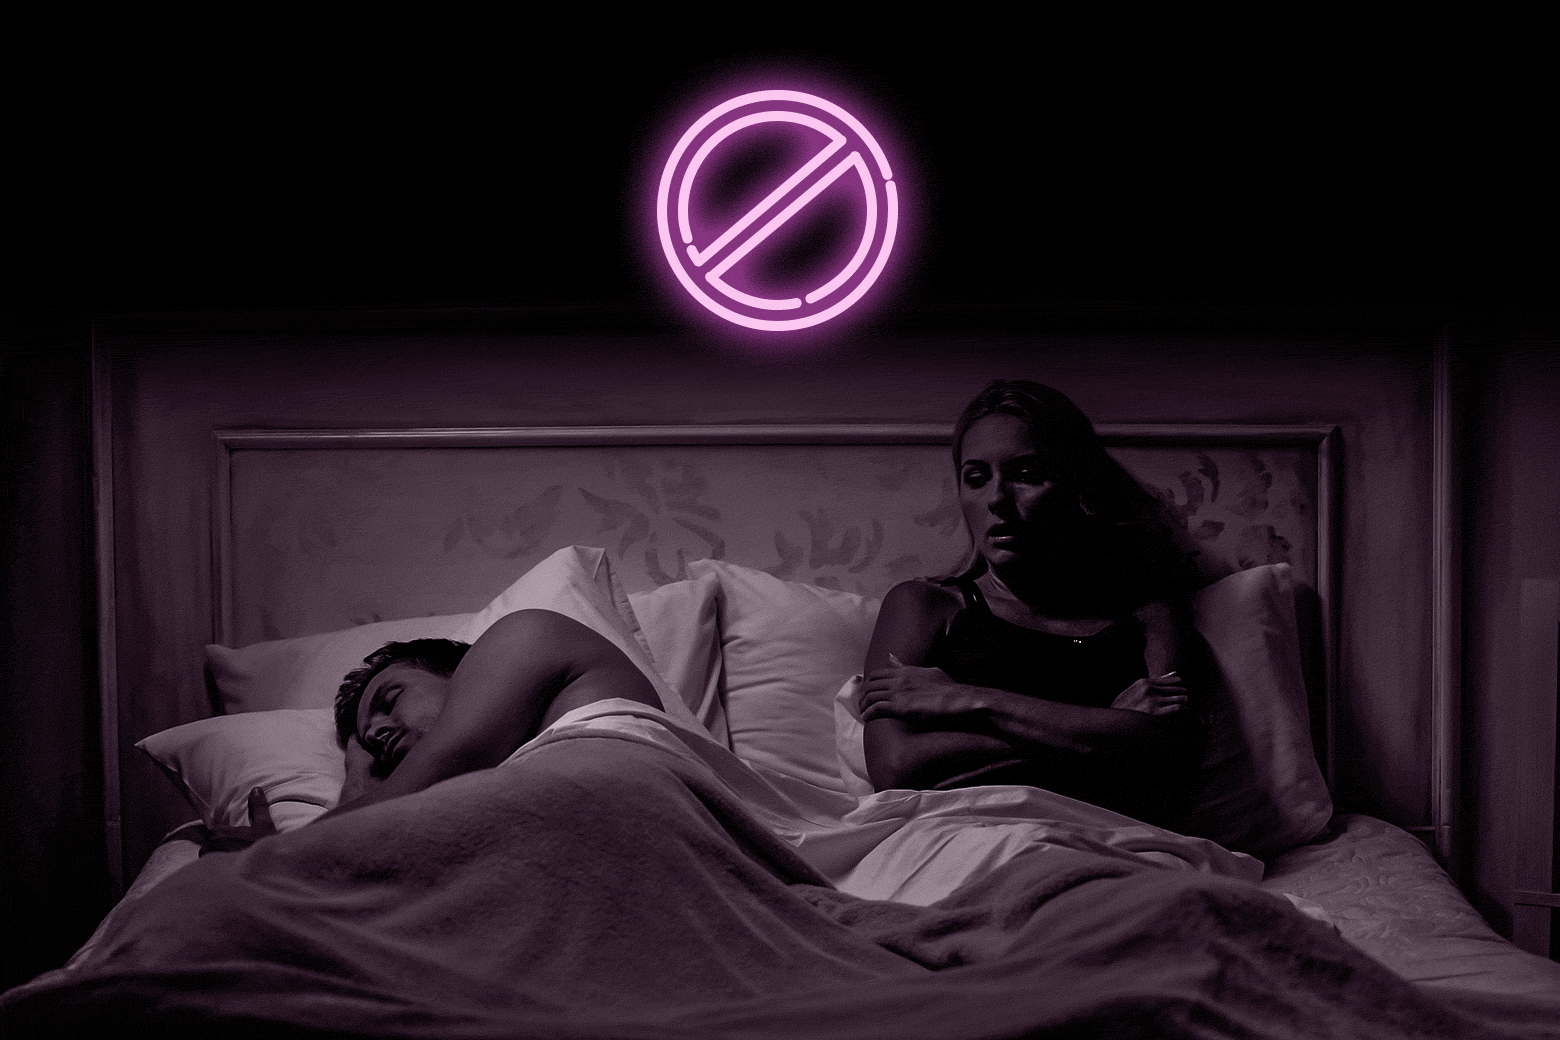 A woman sits up in bed frustrated while a man sleeps. A neon "no entry" sign blinks above.